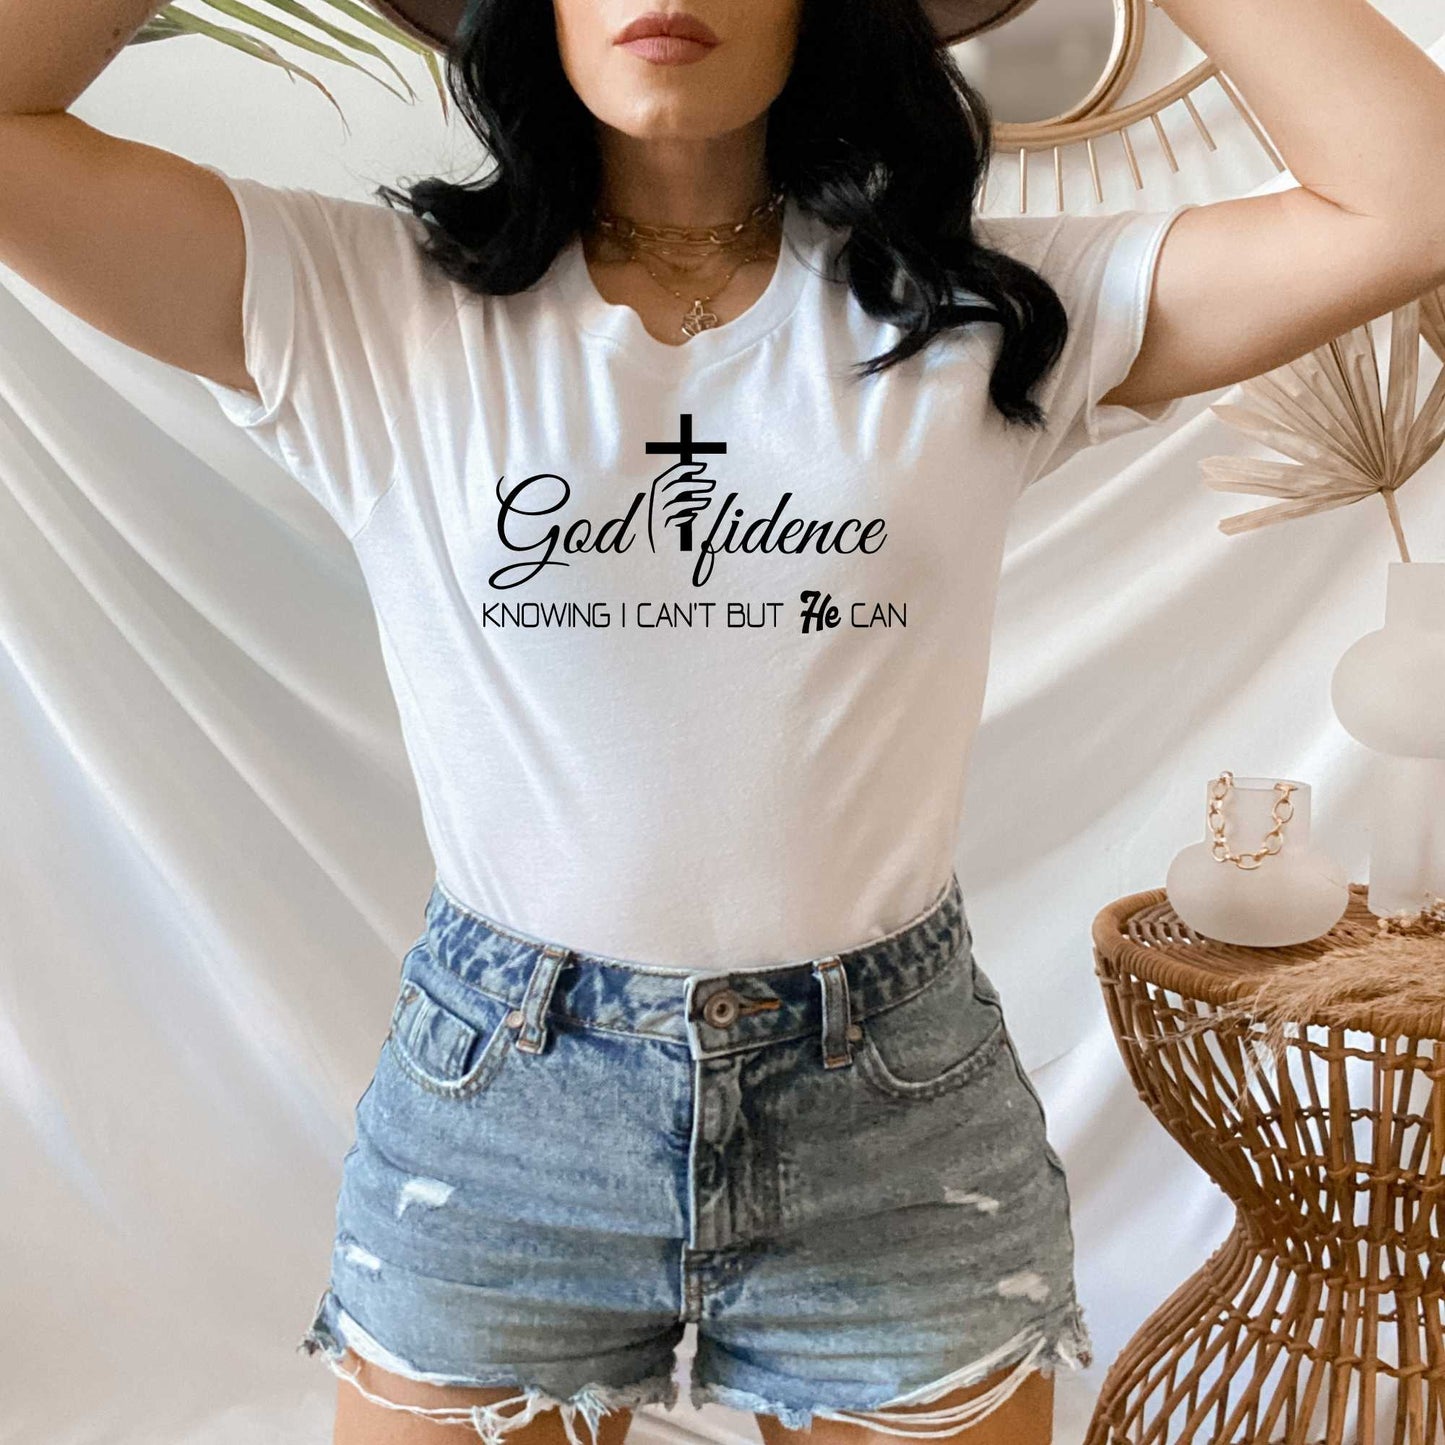 Godfidence, Knowing I Can't Be He Can, Christian Shirt for Women